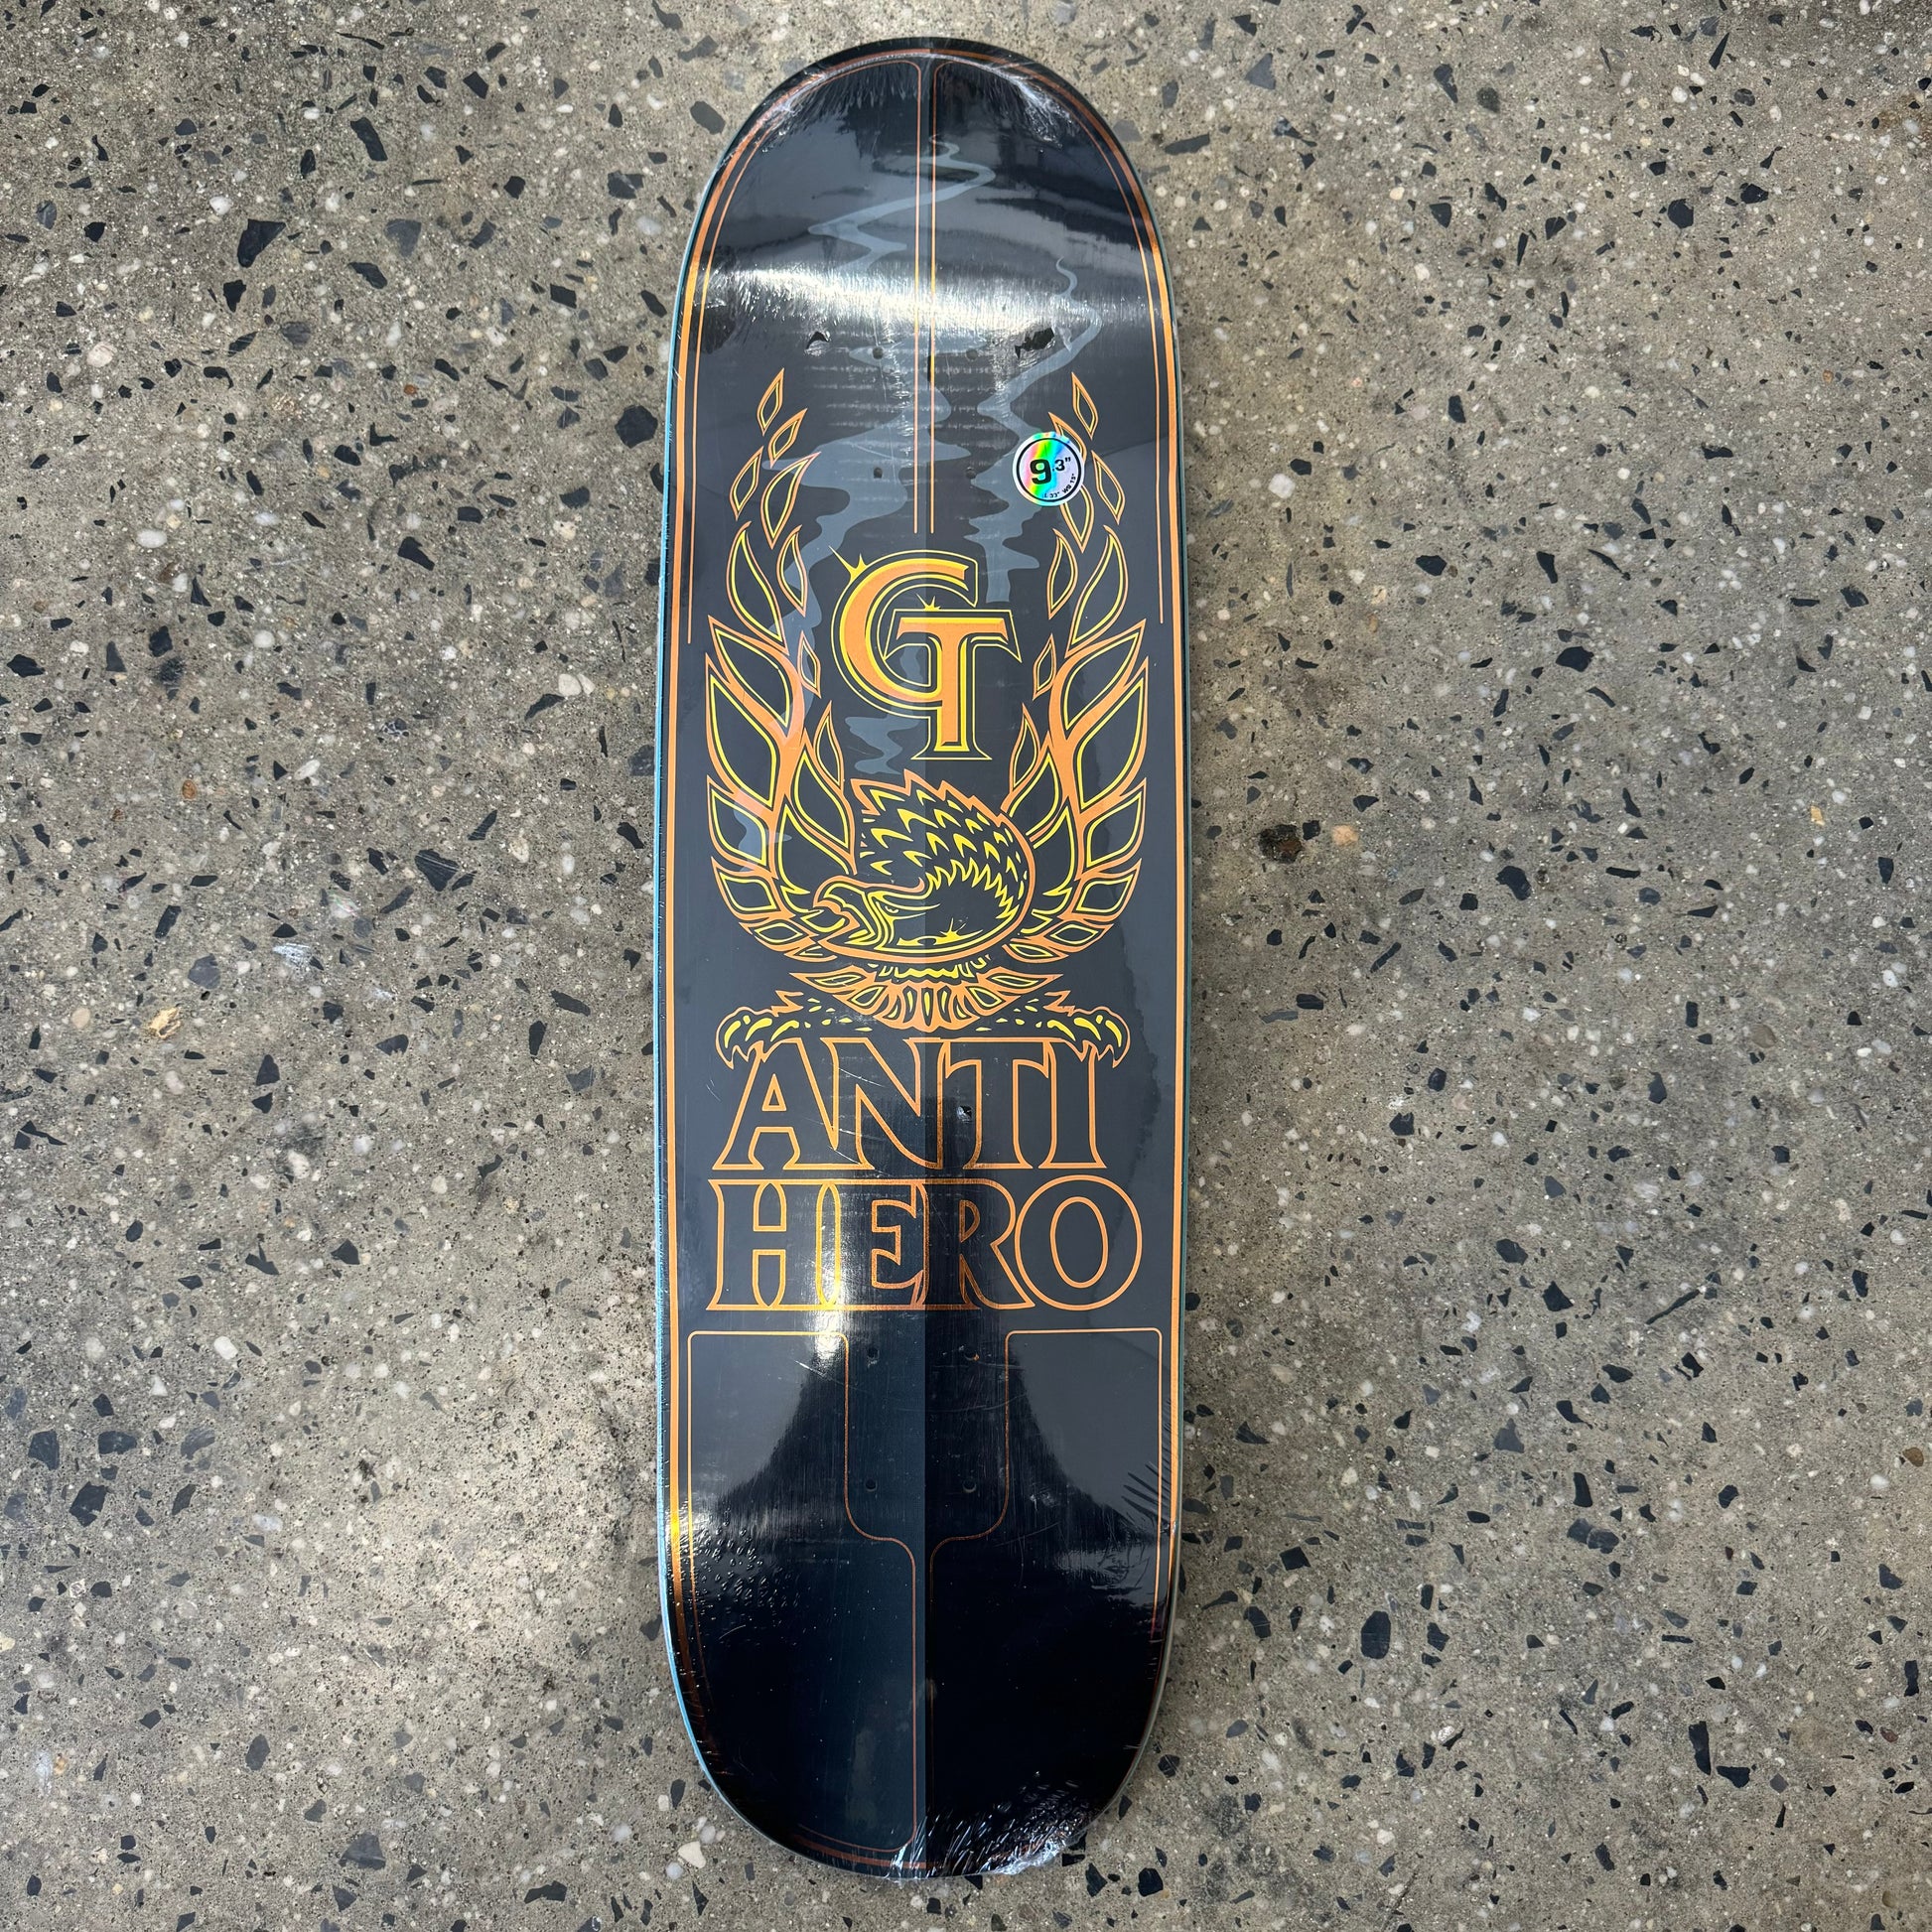 Yellow and gold GT logo with eagle and stacked anti hero logo, on black skate deck